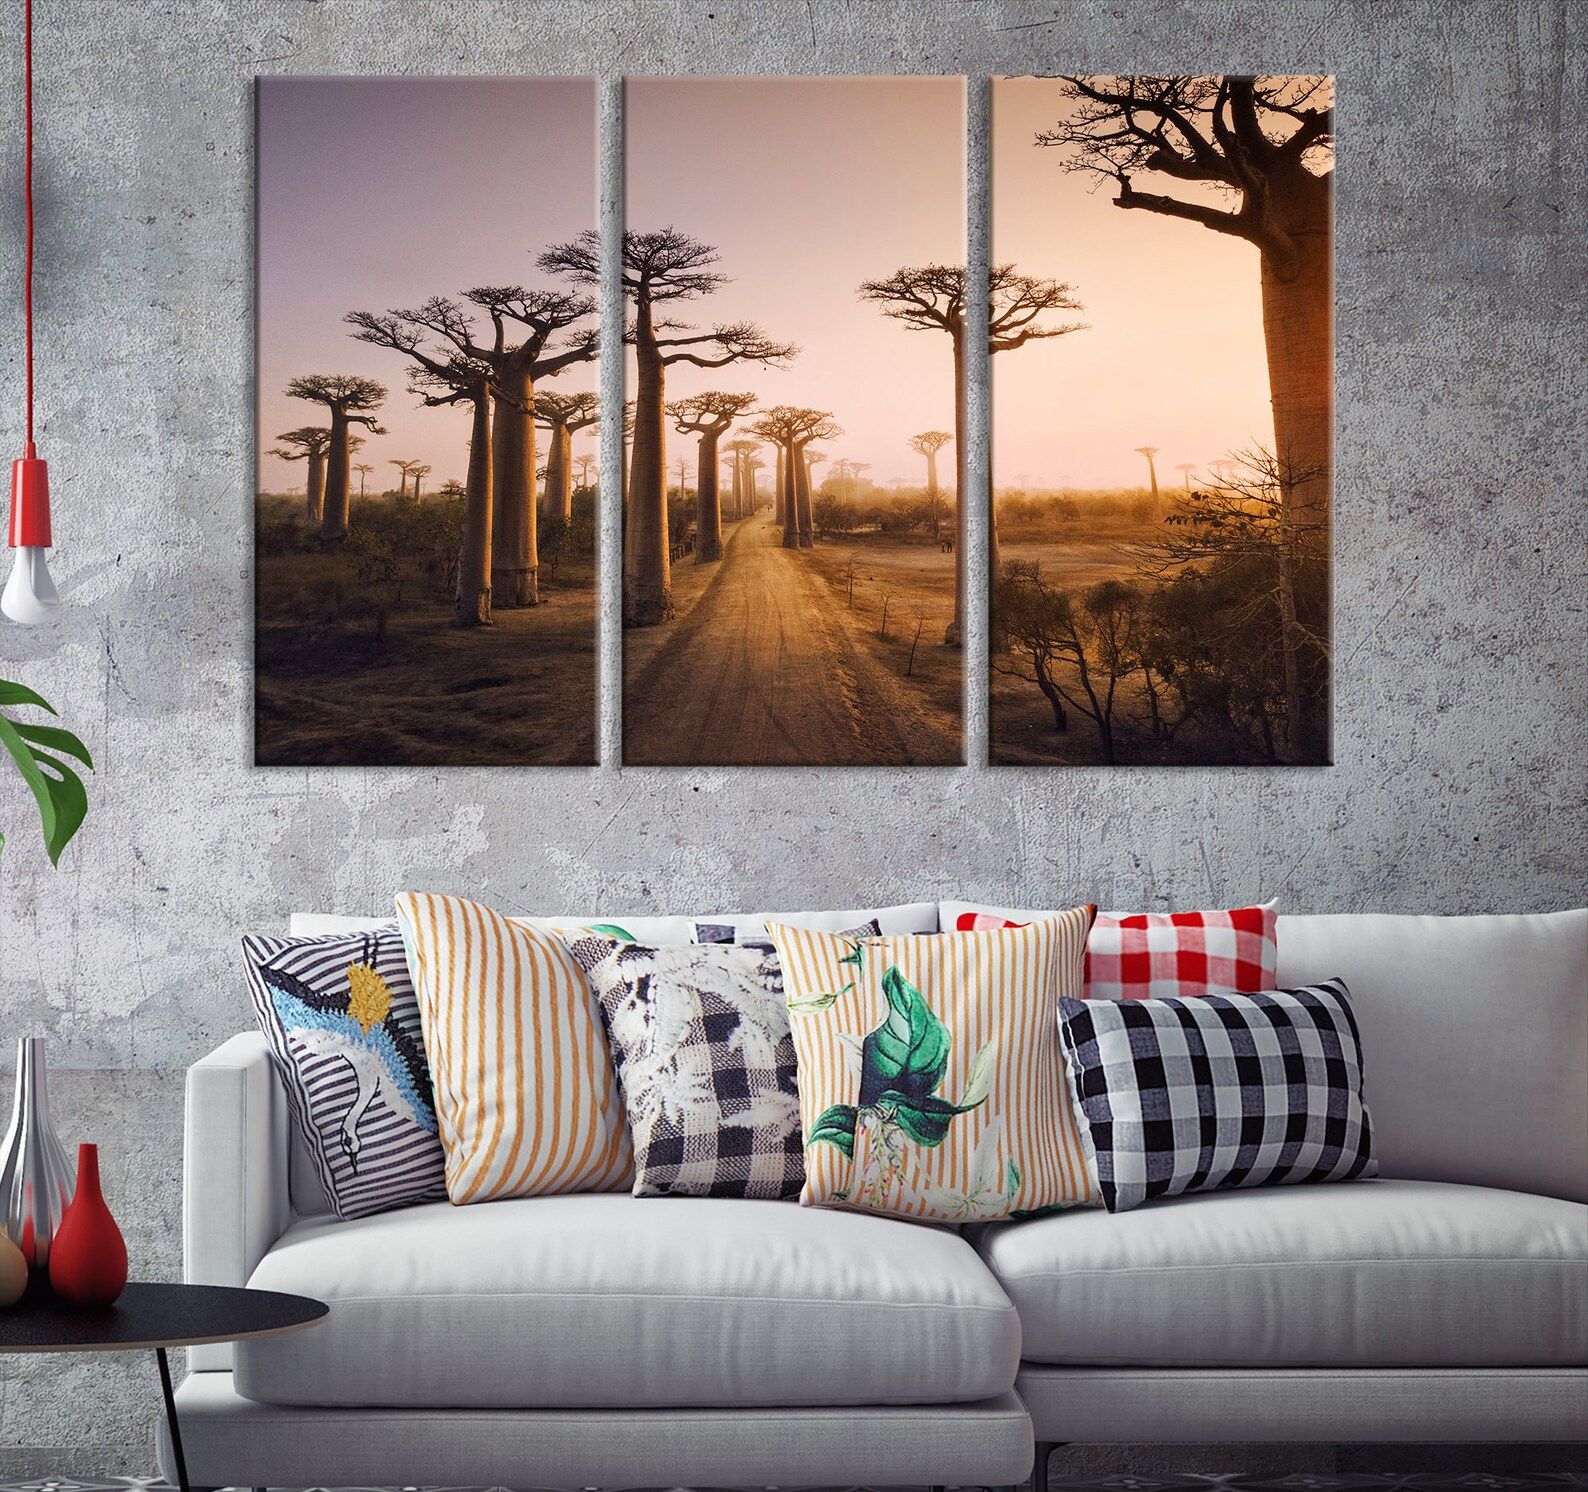 Soulagement Acacia Trees Art Print Grand Wall Art Relaxing | Etsy Regarding Best And Newest Acacia Tree Wall Art (View 2 of 20)